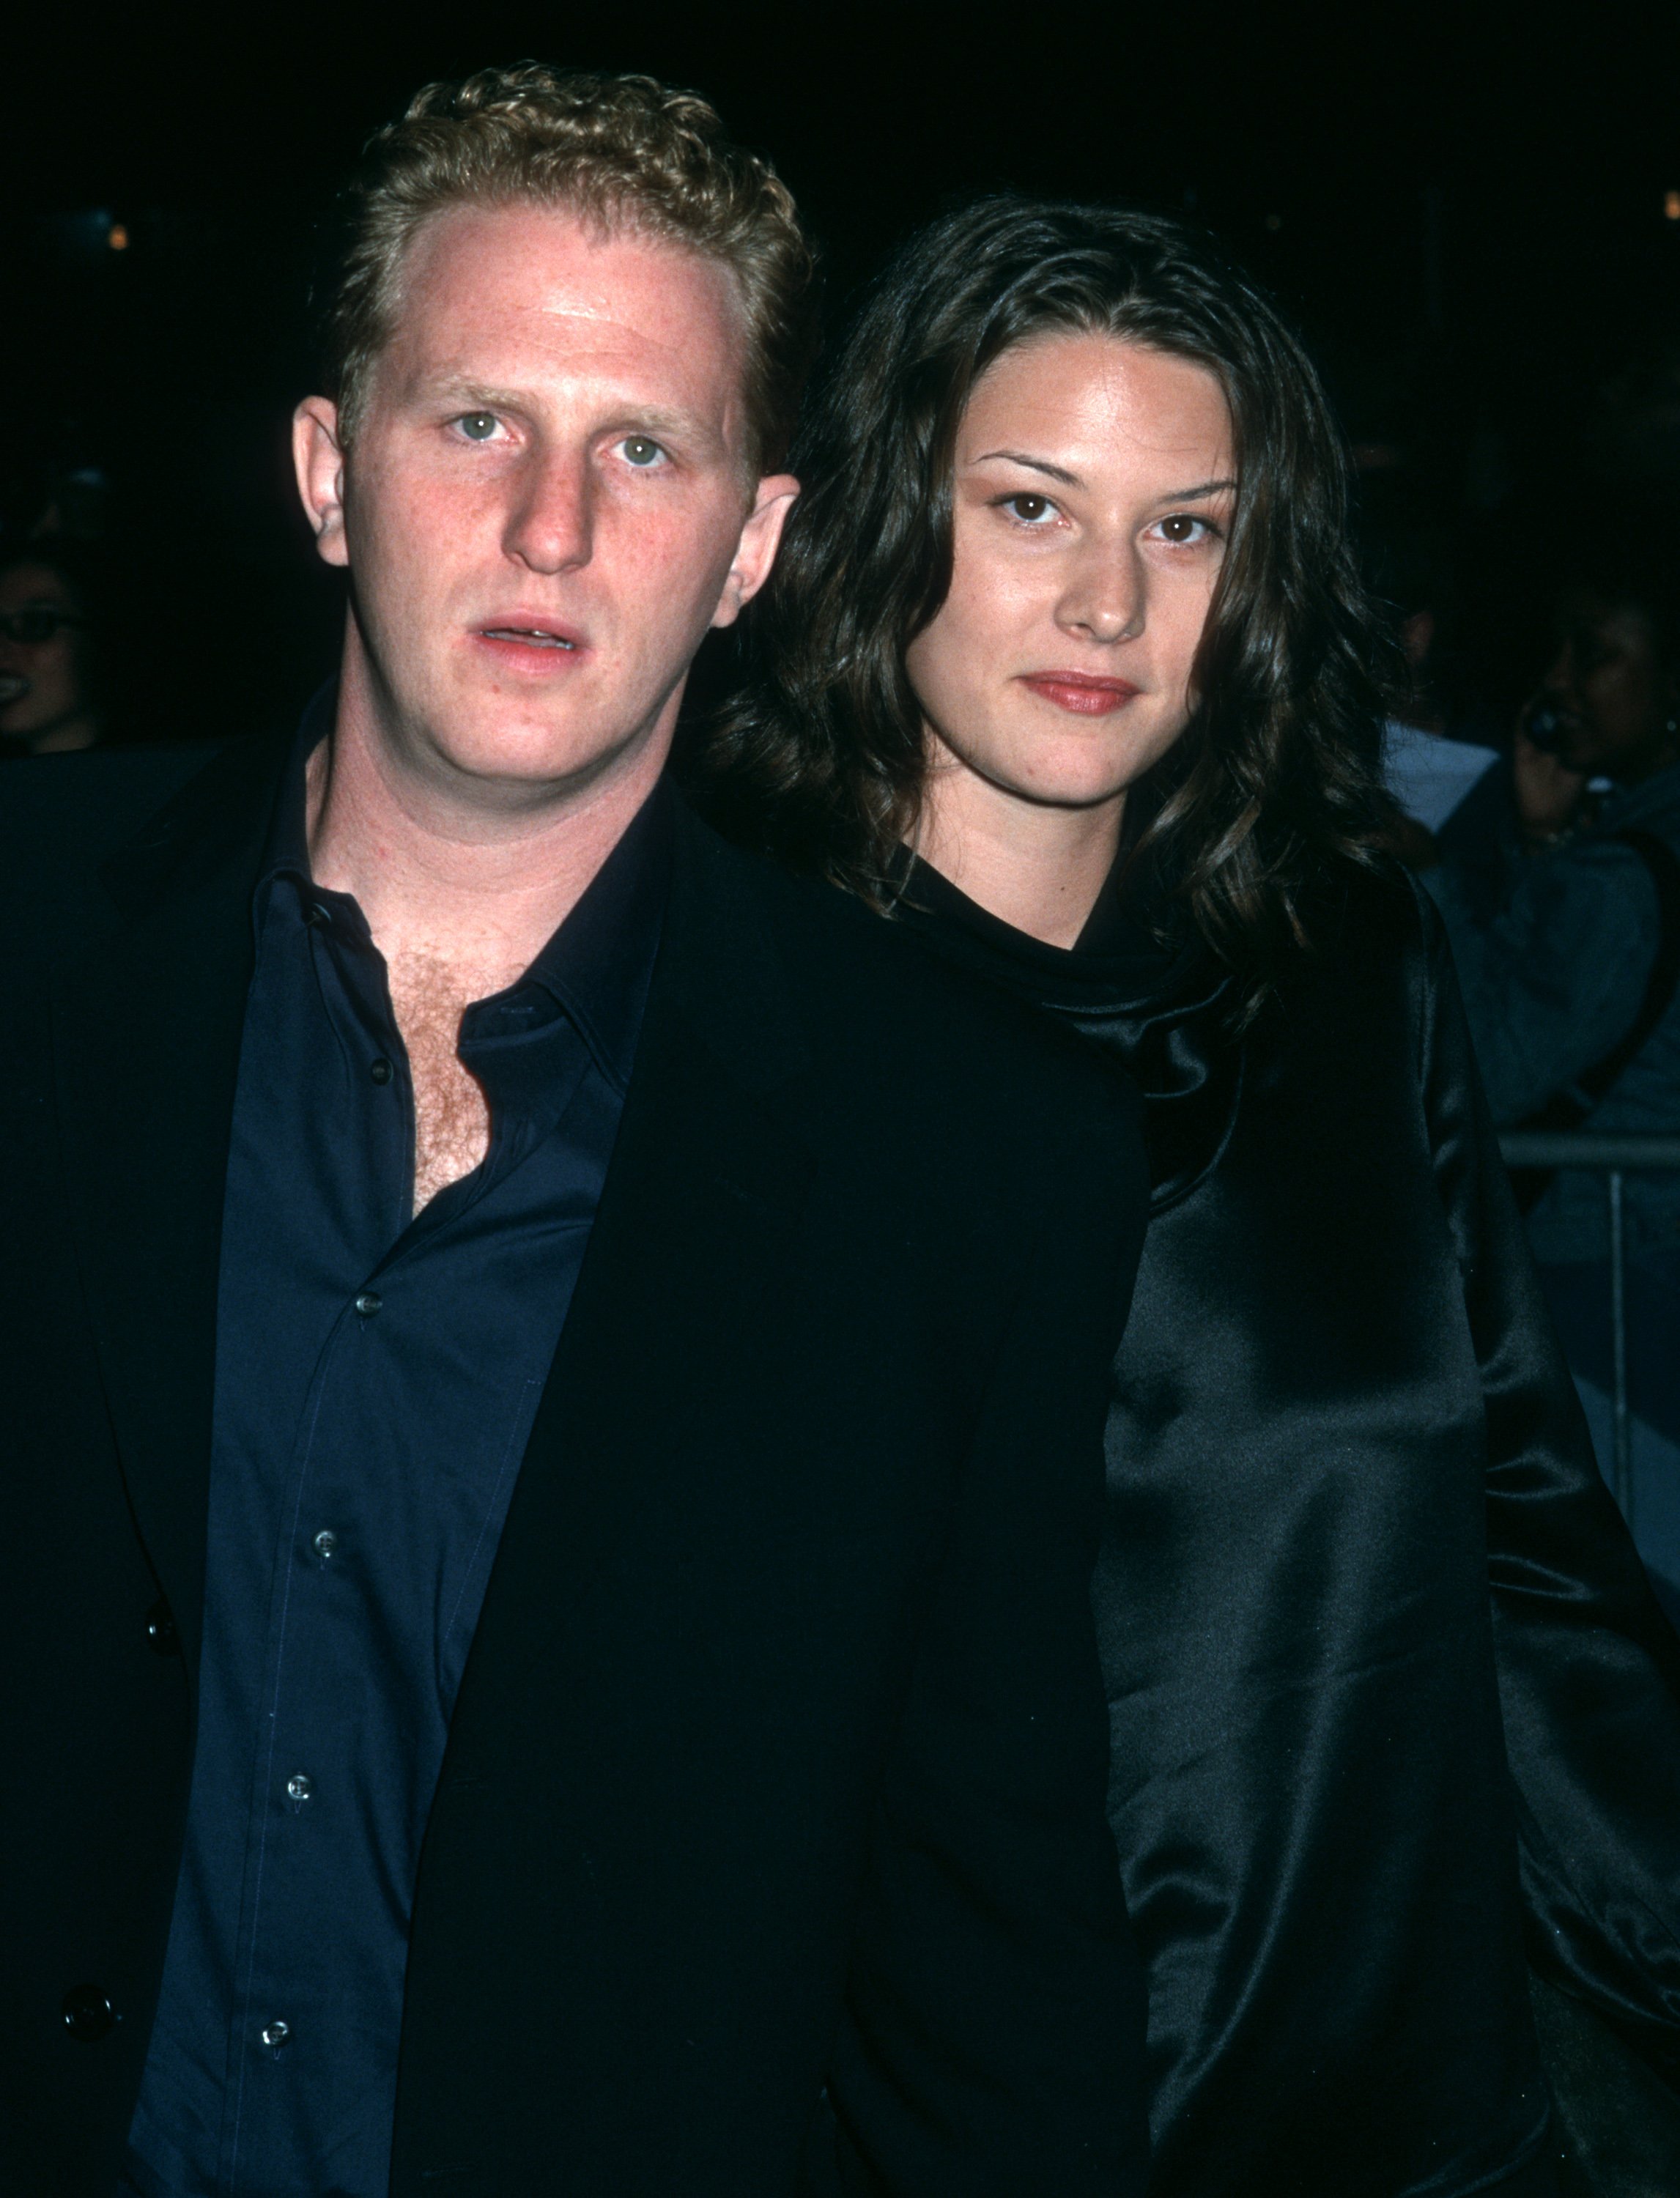 Michael Rapaport and Nichole Beatty at the premiere of  "Bamboozled" in New York City, in 2000. | Source: Getty Images